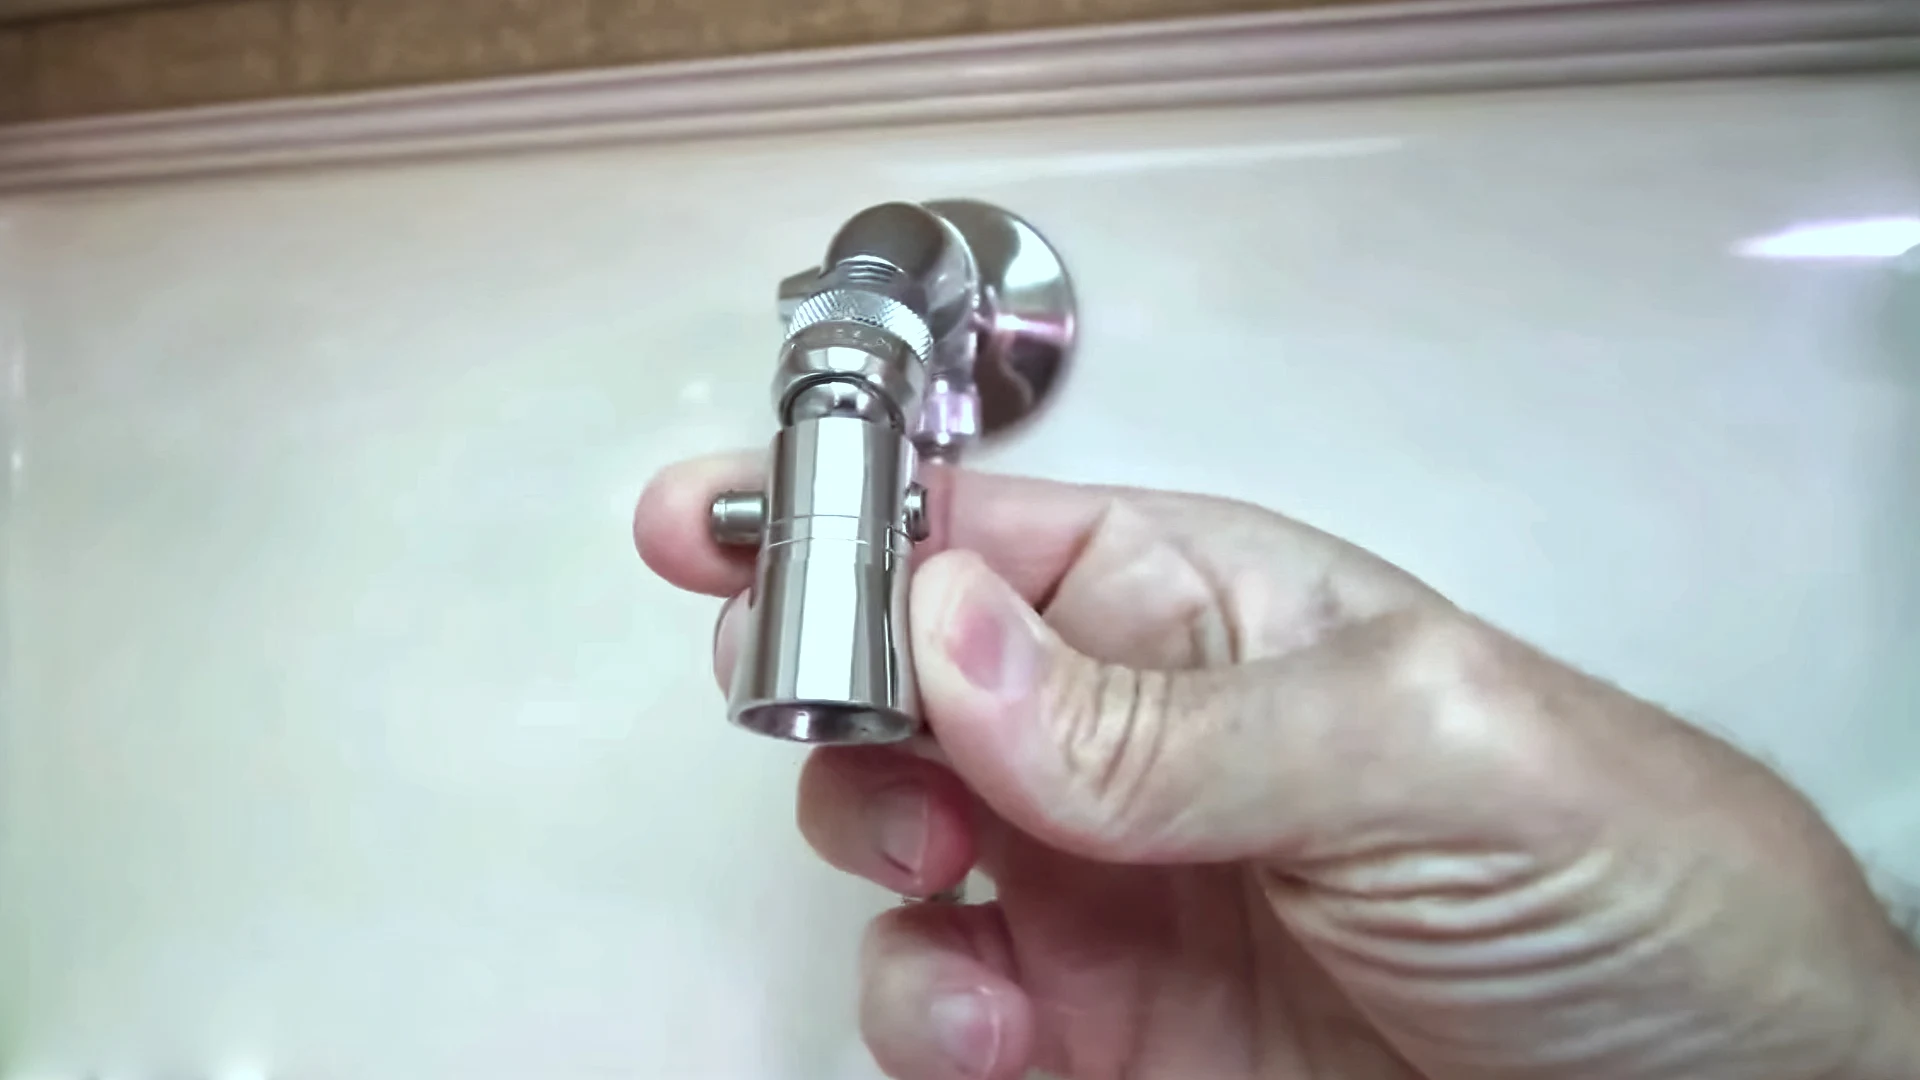 Photo of a hand unscrewing an RV shower head that's clogged to demineralize it